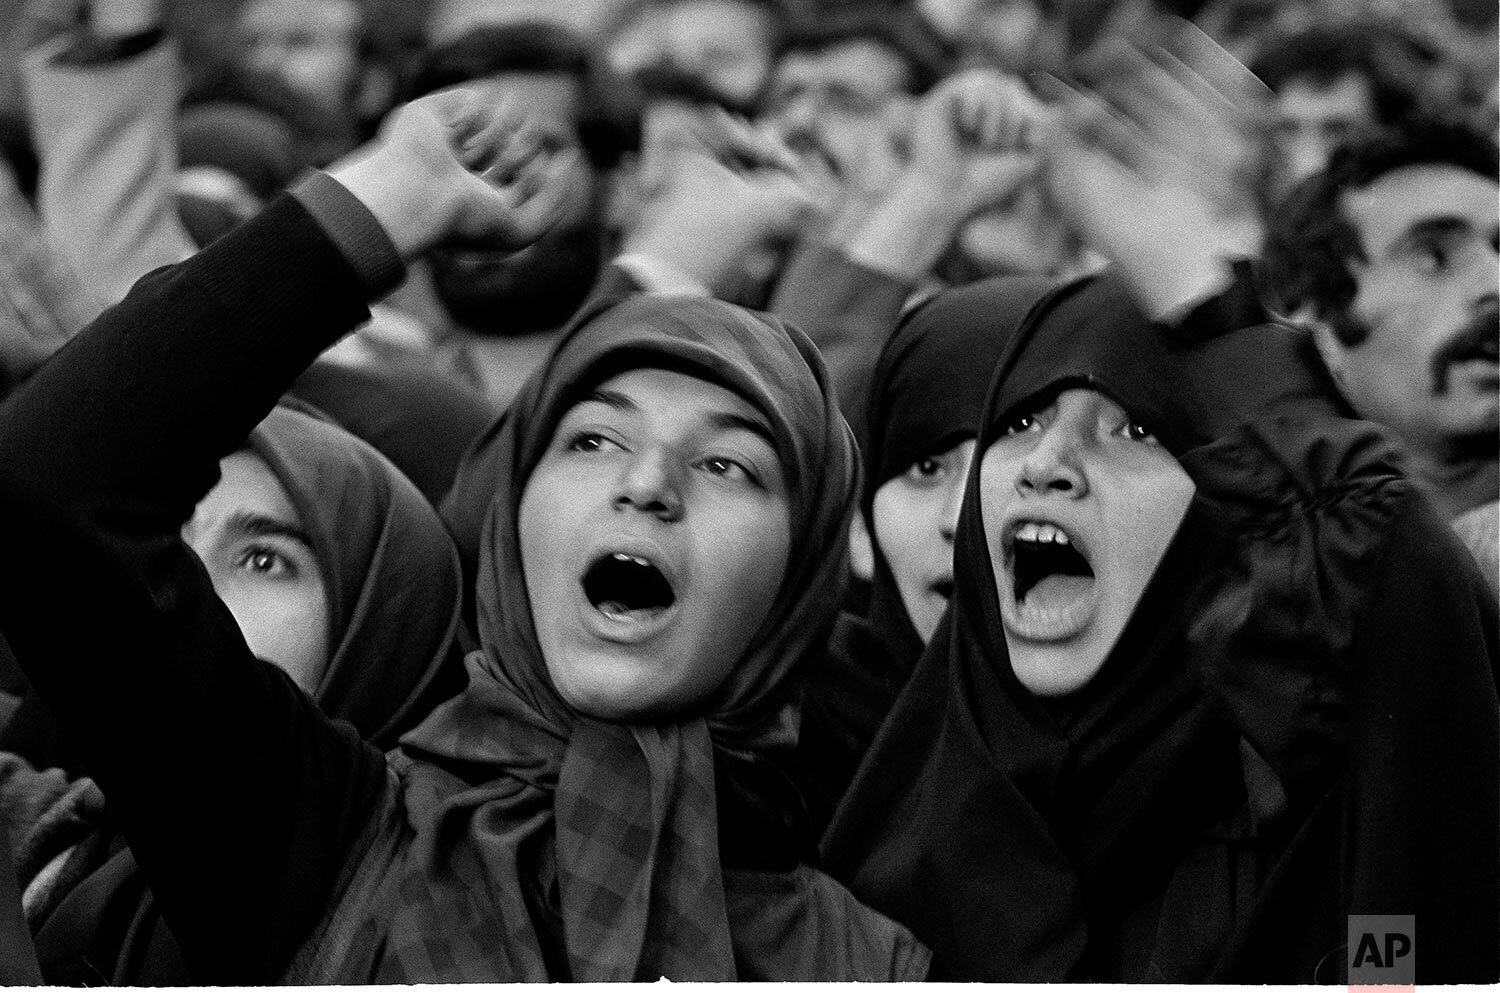  Iranian girls shout demands for President Carter to return the former Shah of Iran to Iran for trial during daily demonstrations outside the U.S. Embassy in Tehran, Nov. 24, 1979, where 50 Americans are being held hostage.  (AP Photo/Herve Merliac) 